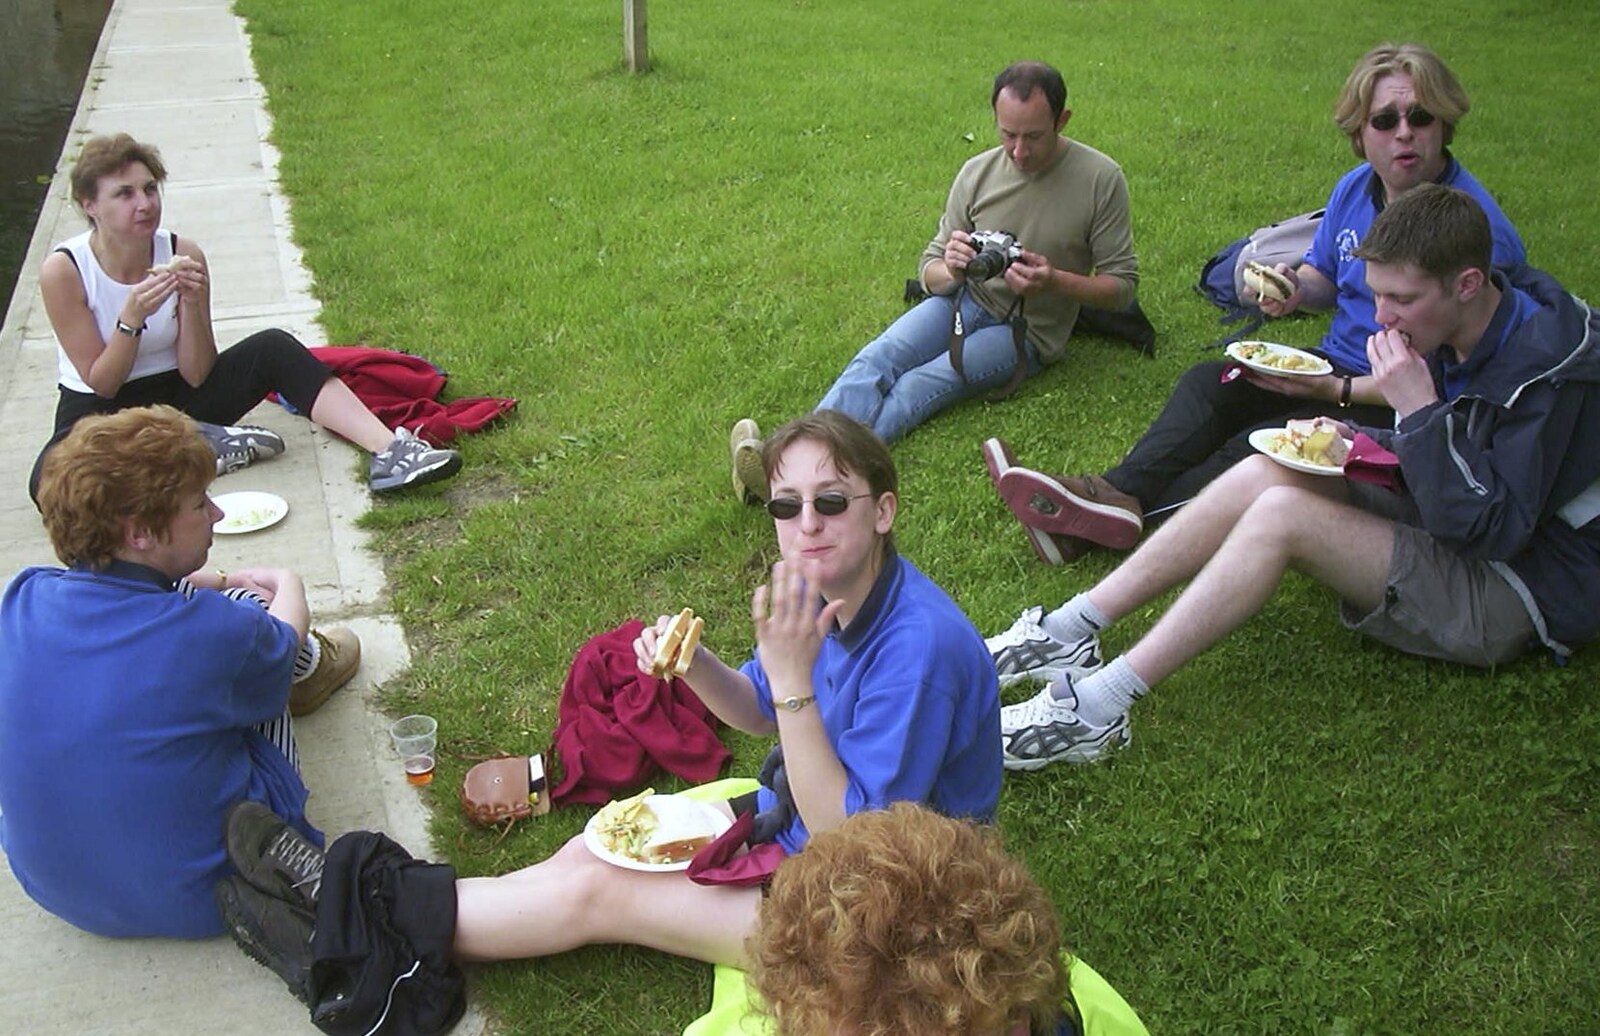 The BSCC Bike Ride, Shefford, Bedford - 11th May 2002: Eating lunch on the river bank